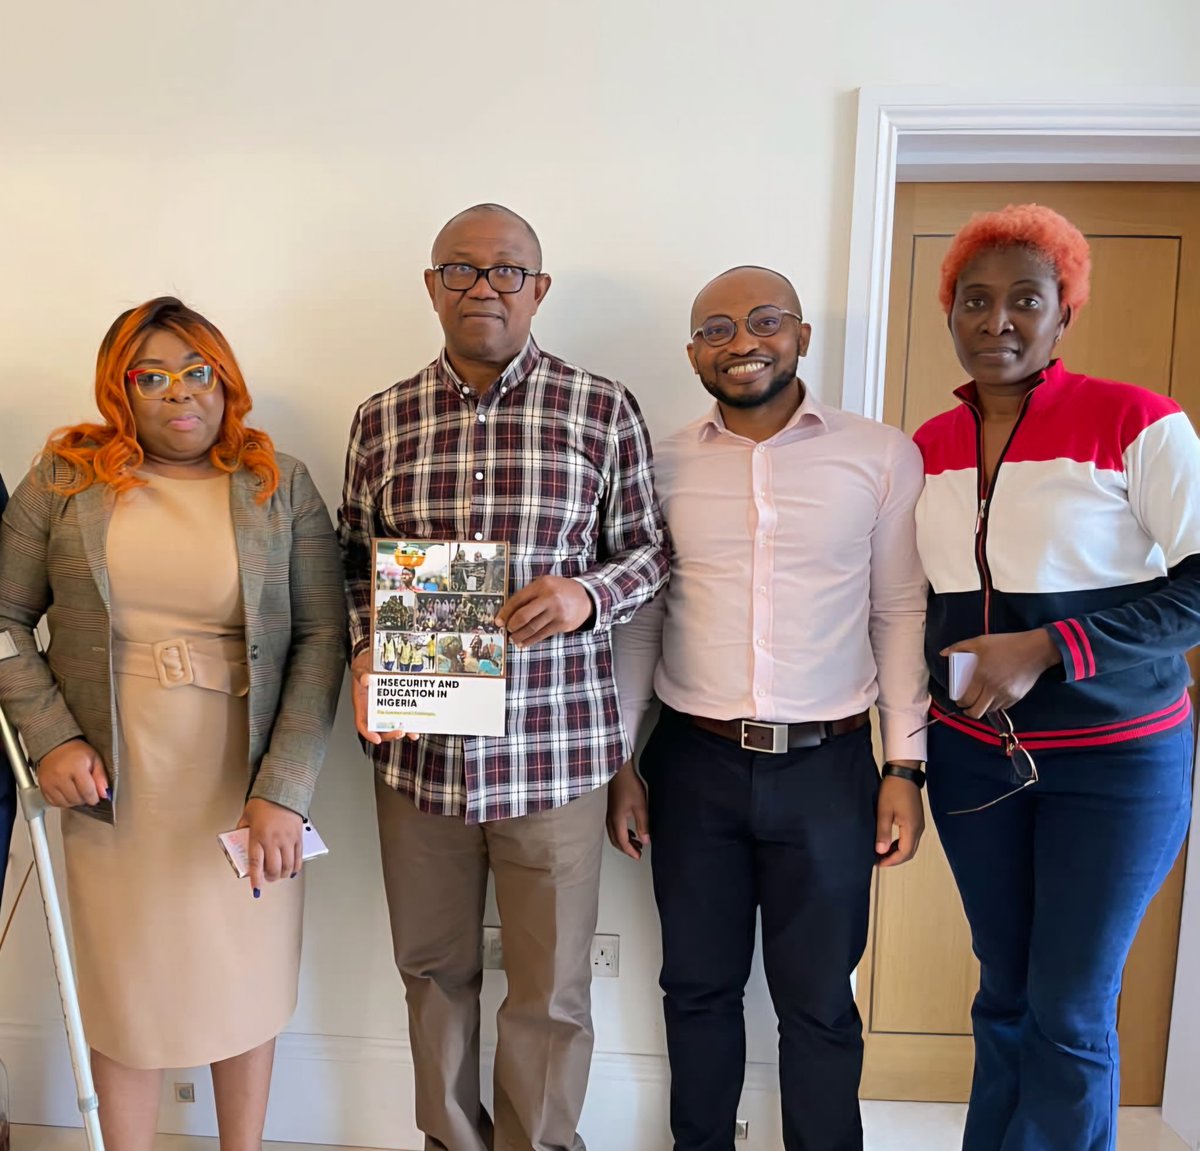 A copy of the report was recently presented to HE Mr Peter Obi and we hope to get his views on the recommendations in the report. cc @BolanleA4 @RBiakpara @PSJUK_Official